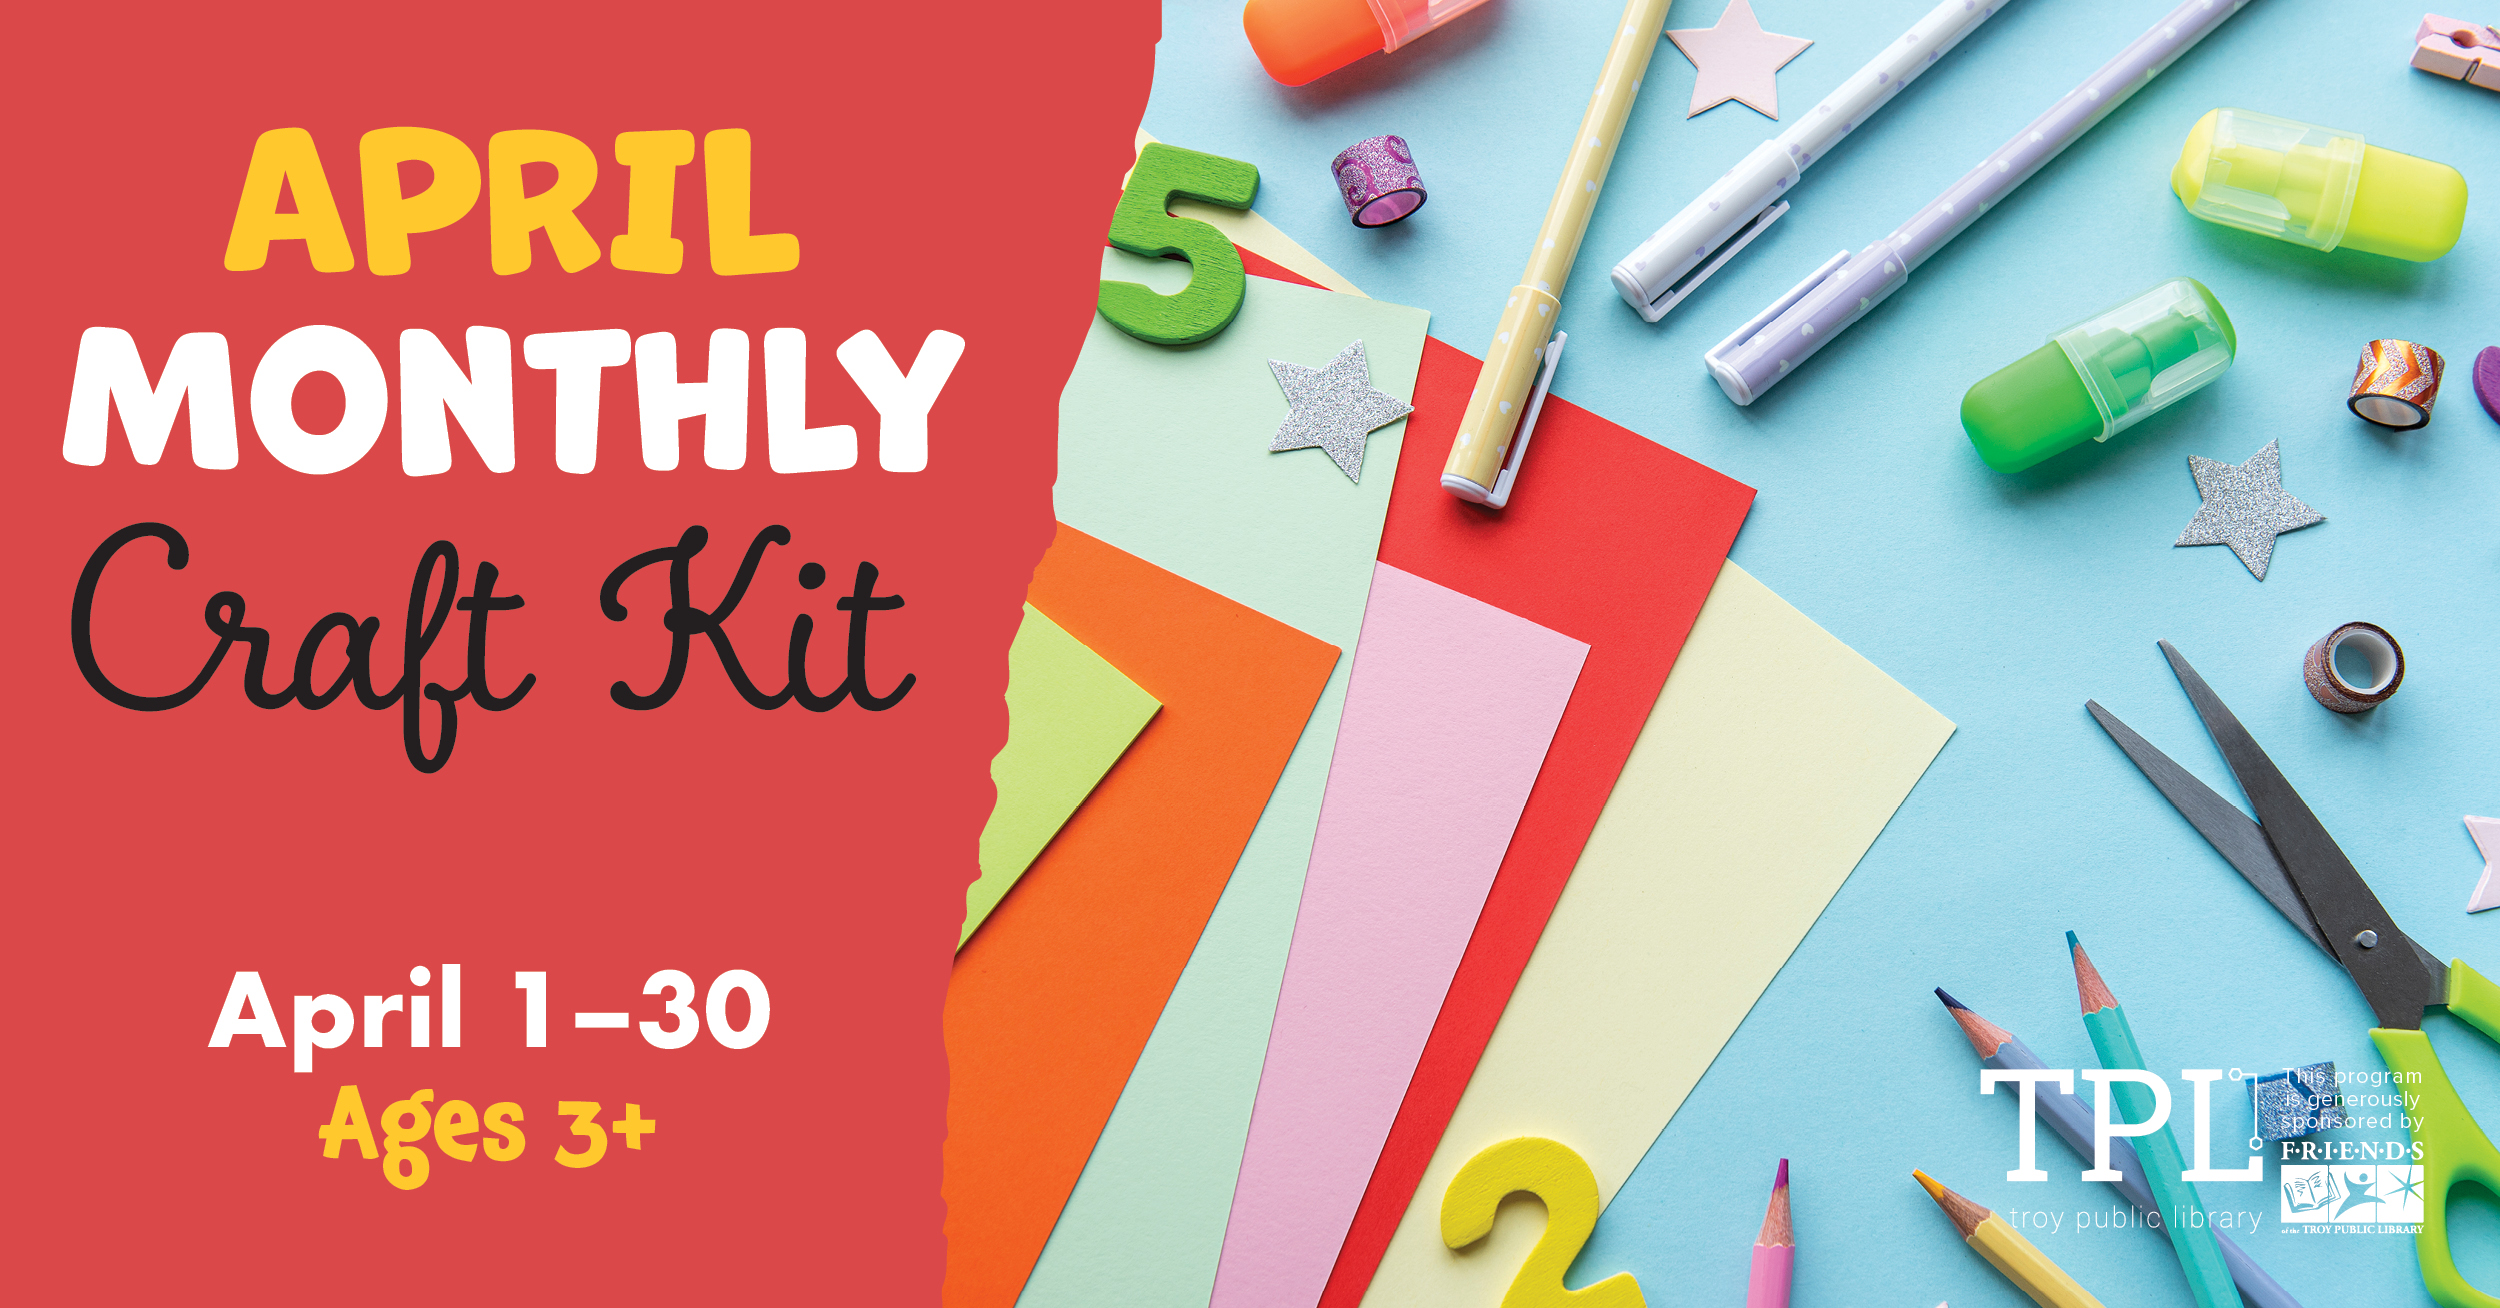 April Monthly Craft Kit April 1-30. Ages 3+. Sponsored by the Friends of the Troy Public Library